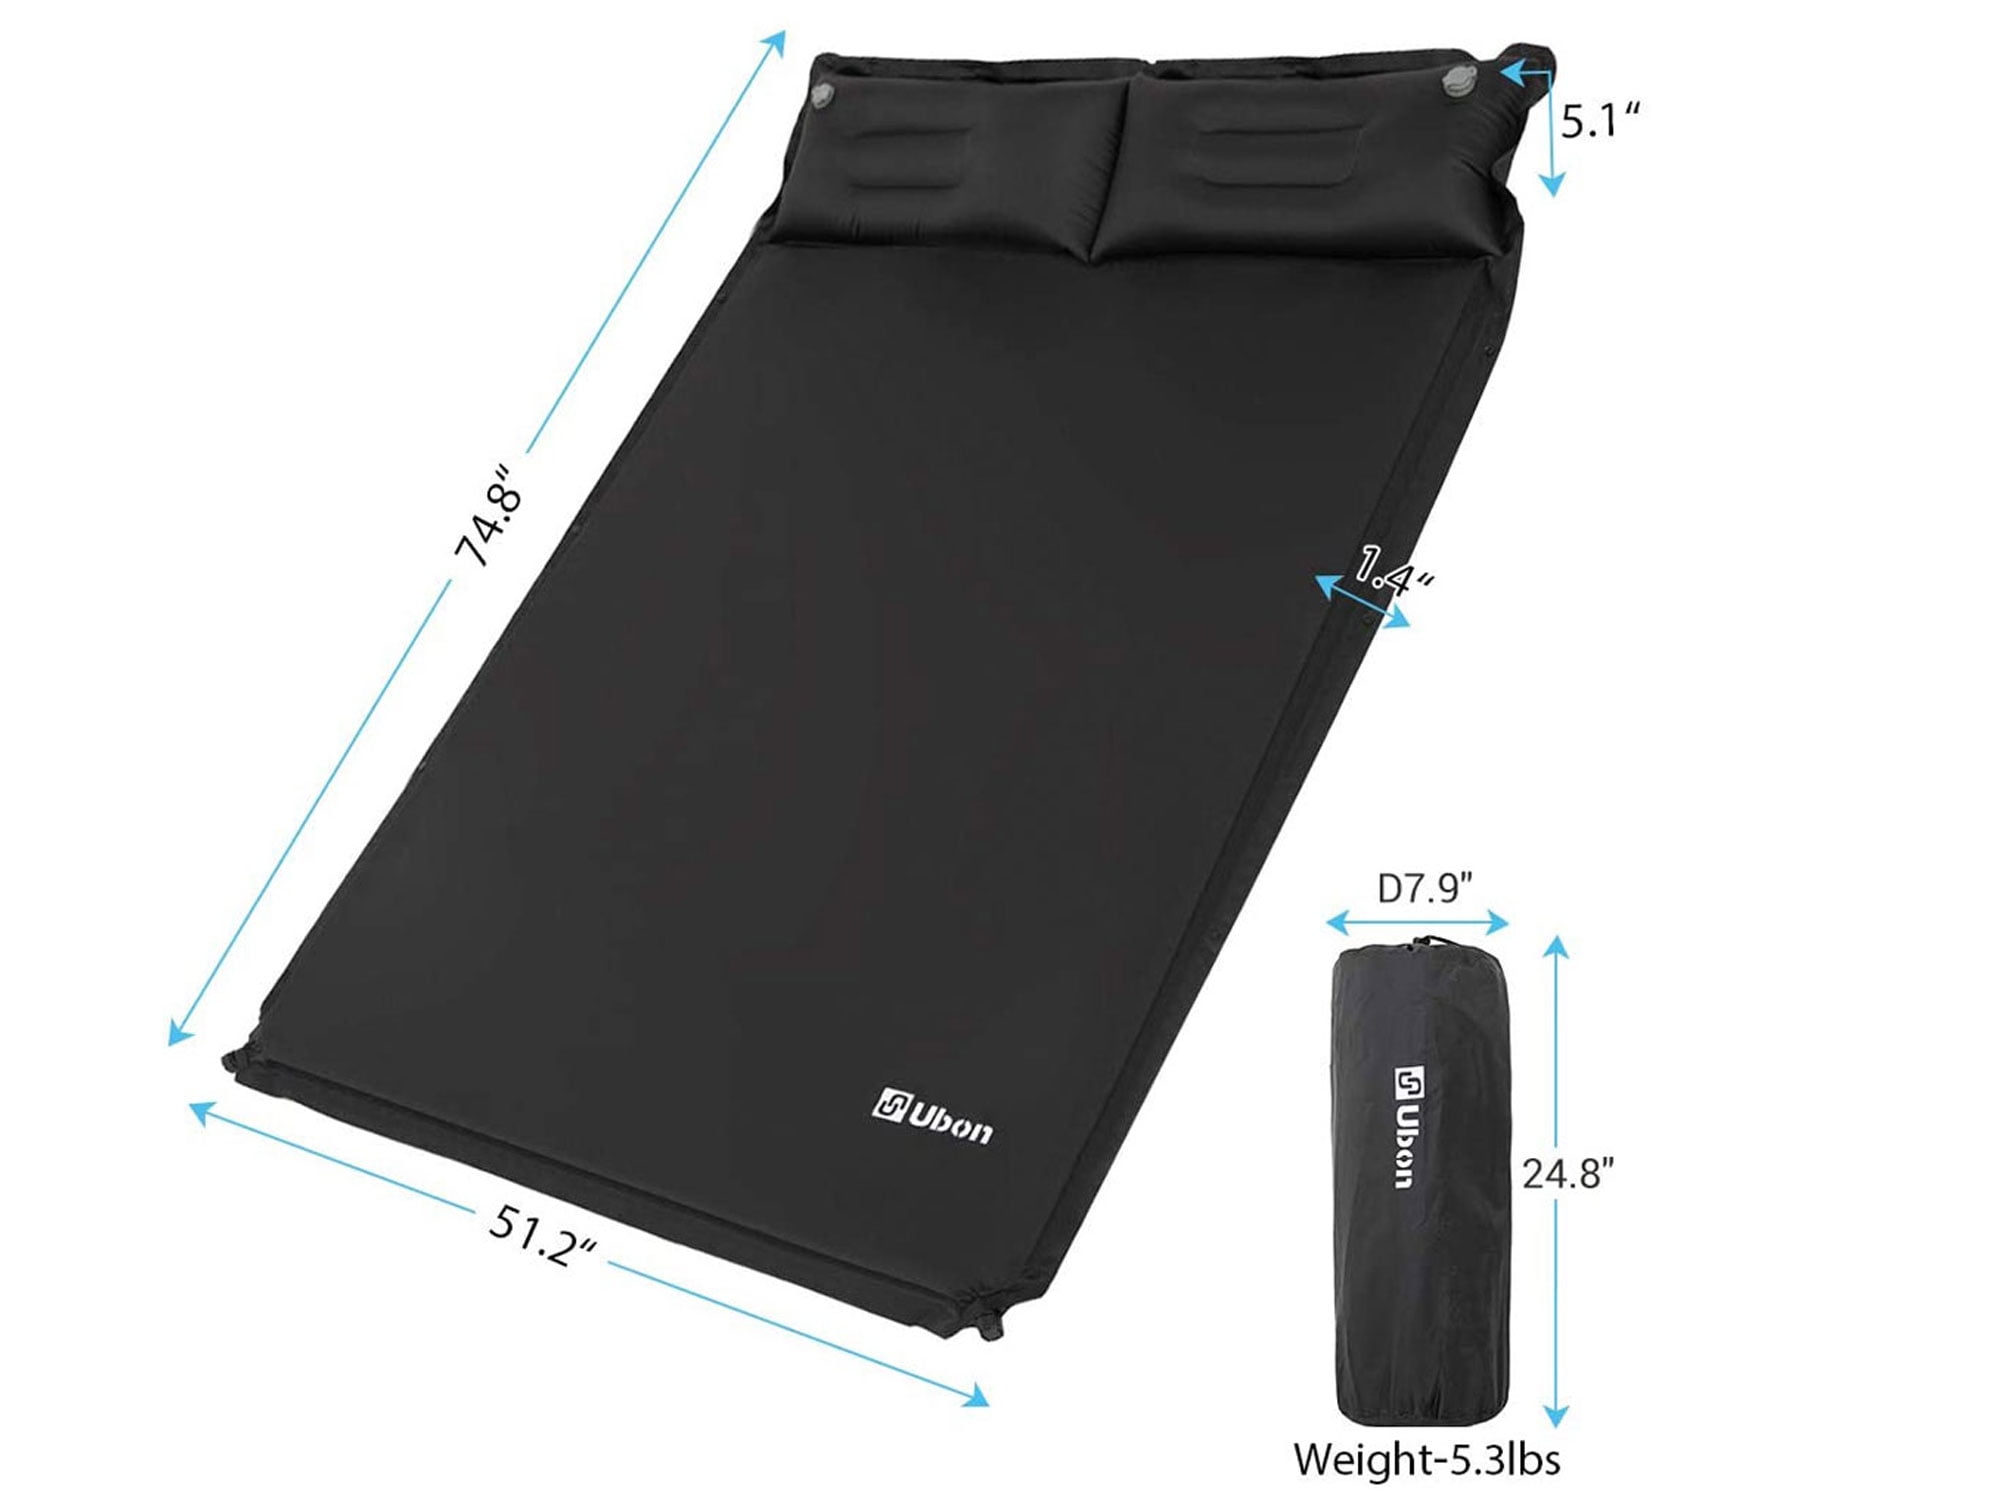 Ubon Double Self-Inflating Sleeping Pad Sleeping Mat for Camping with Pillows Attached Camp Sleep Pad for Backpacking Hiking Air Mattress Lightweight Inflatable & Compact